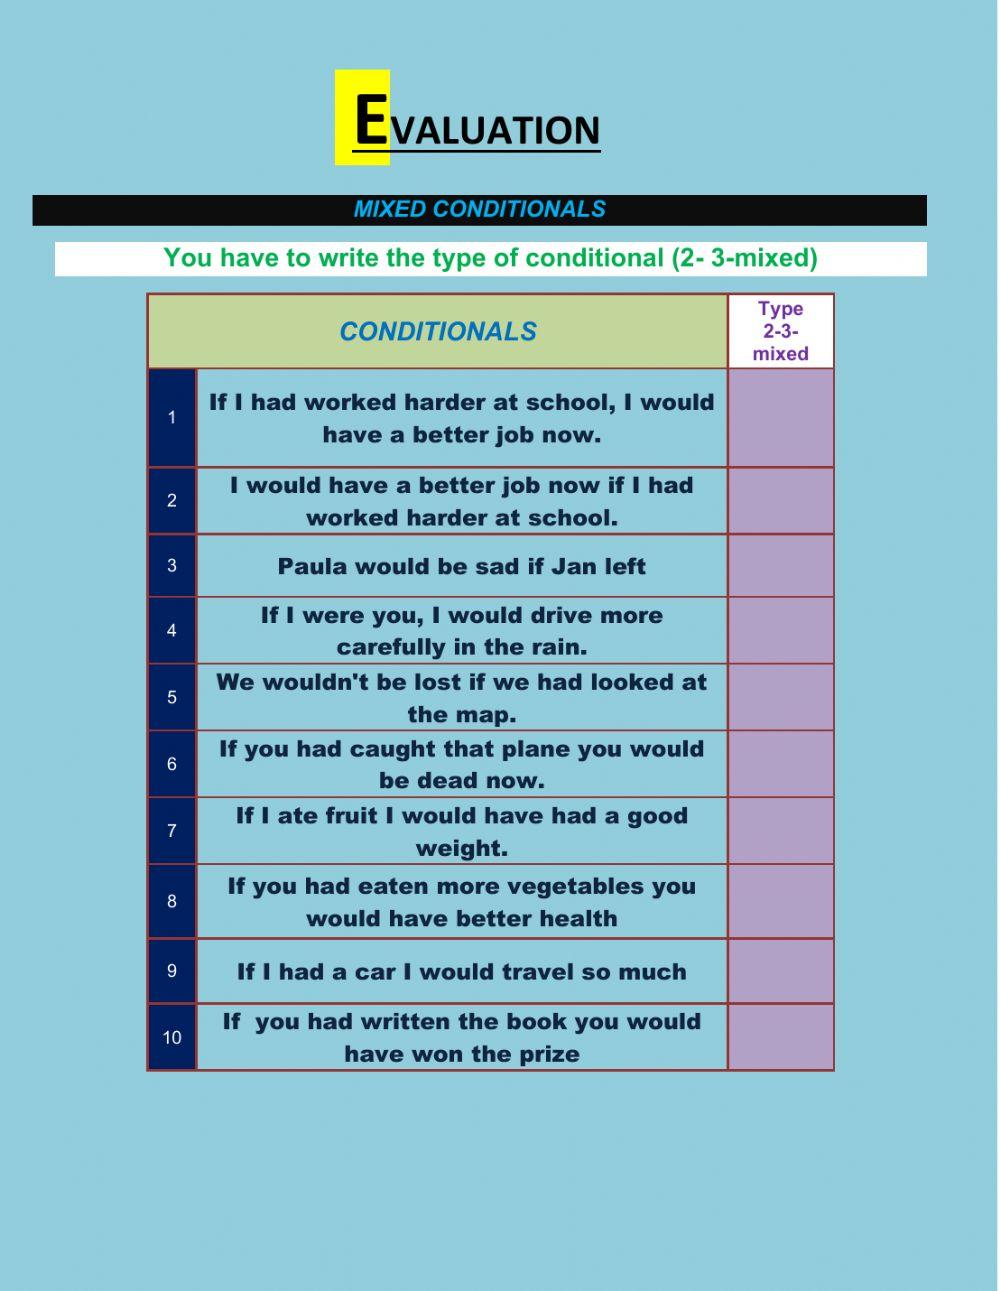 Mixed conditionals